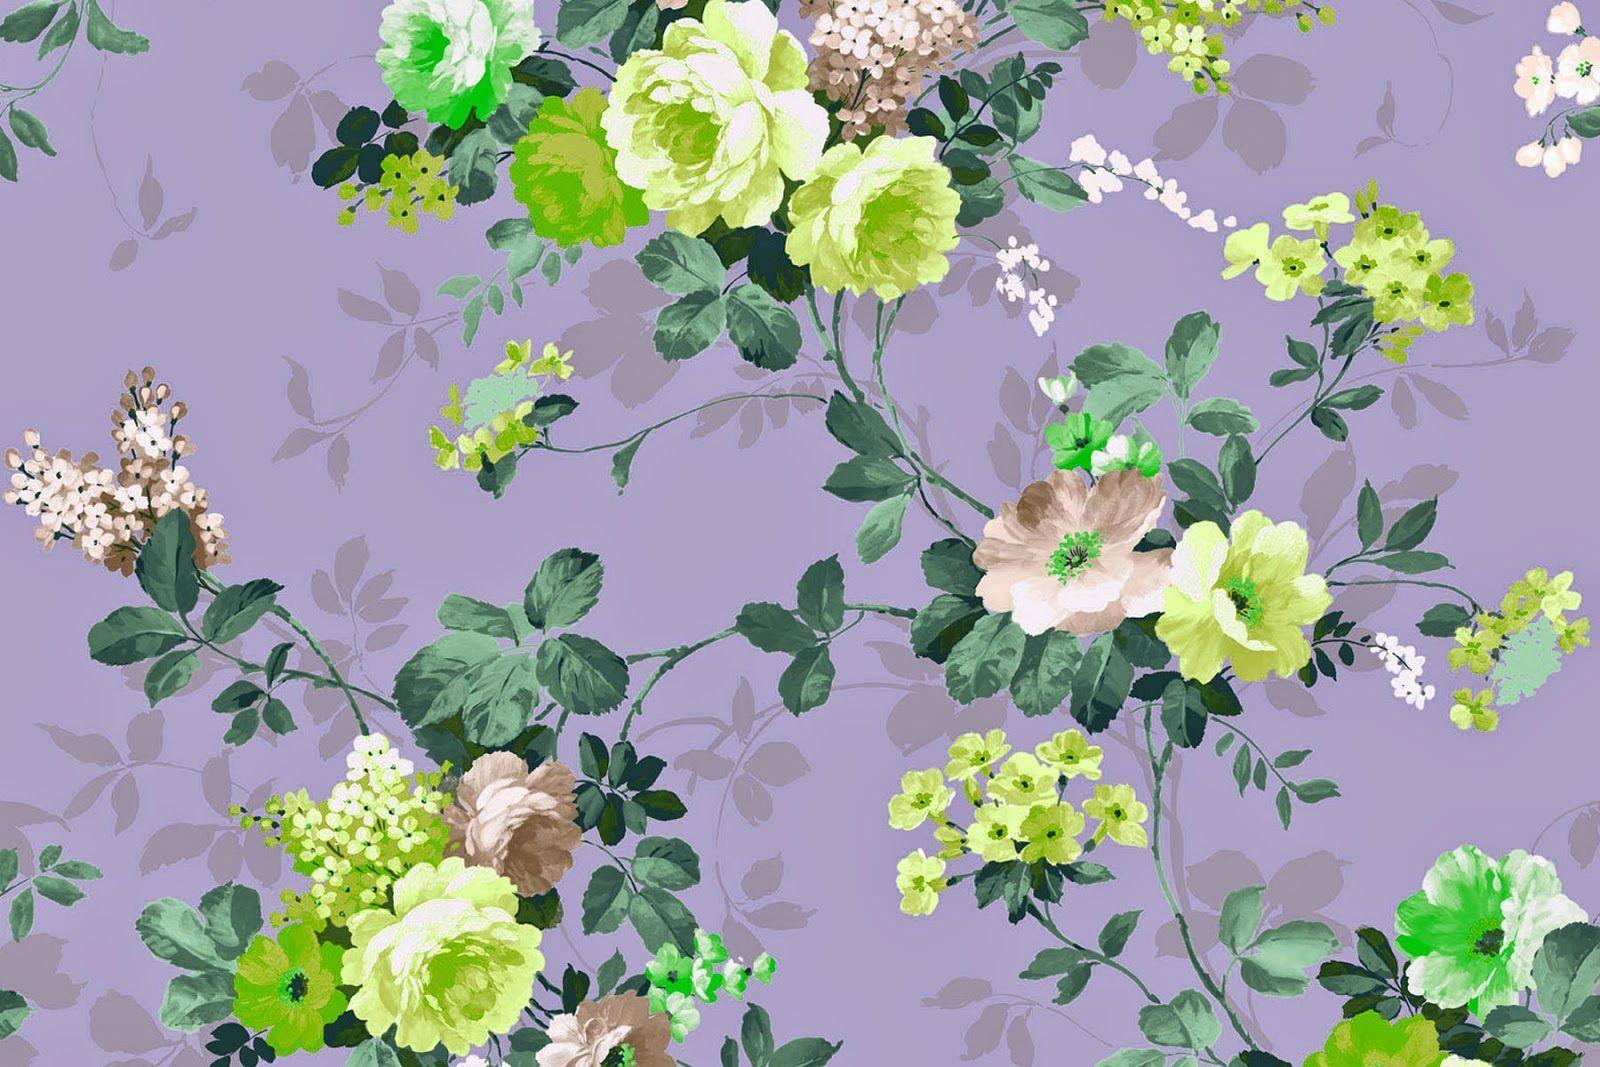 Doodlecraft: Vintage Floral Wallpaper Freebies!. NATURE IN ANOTHER